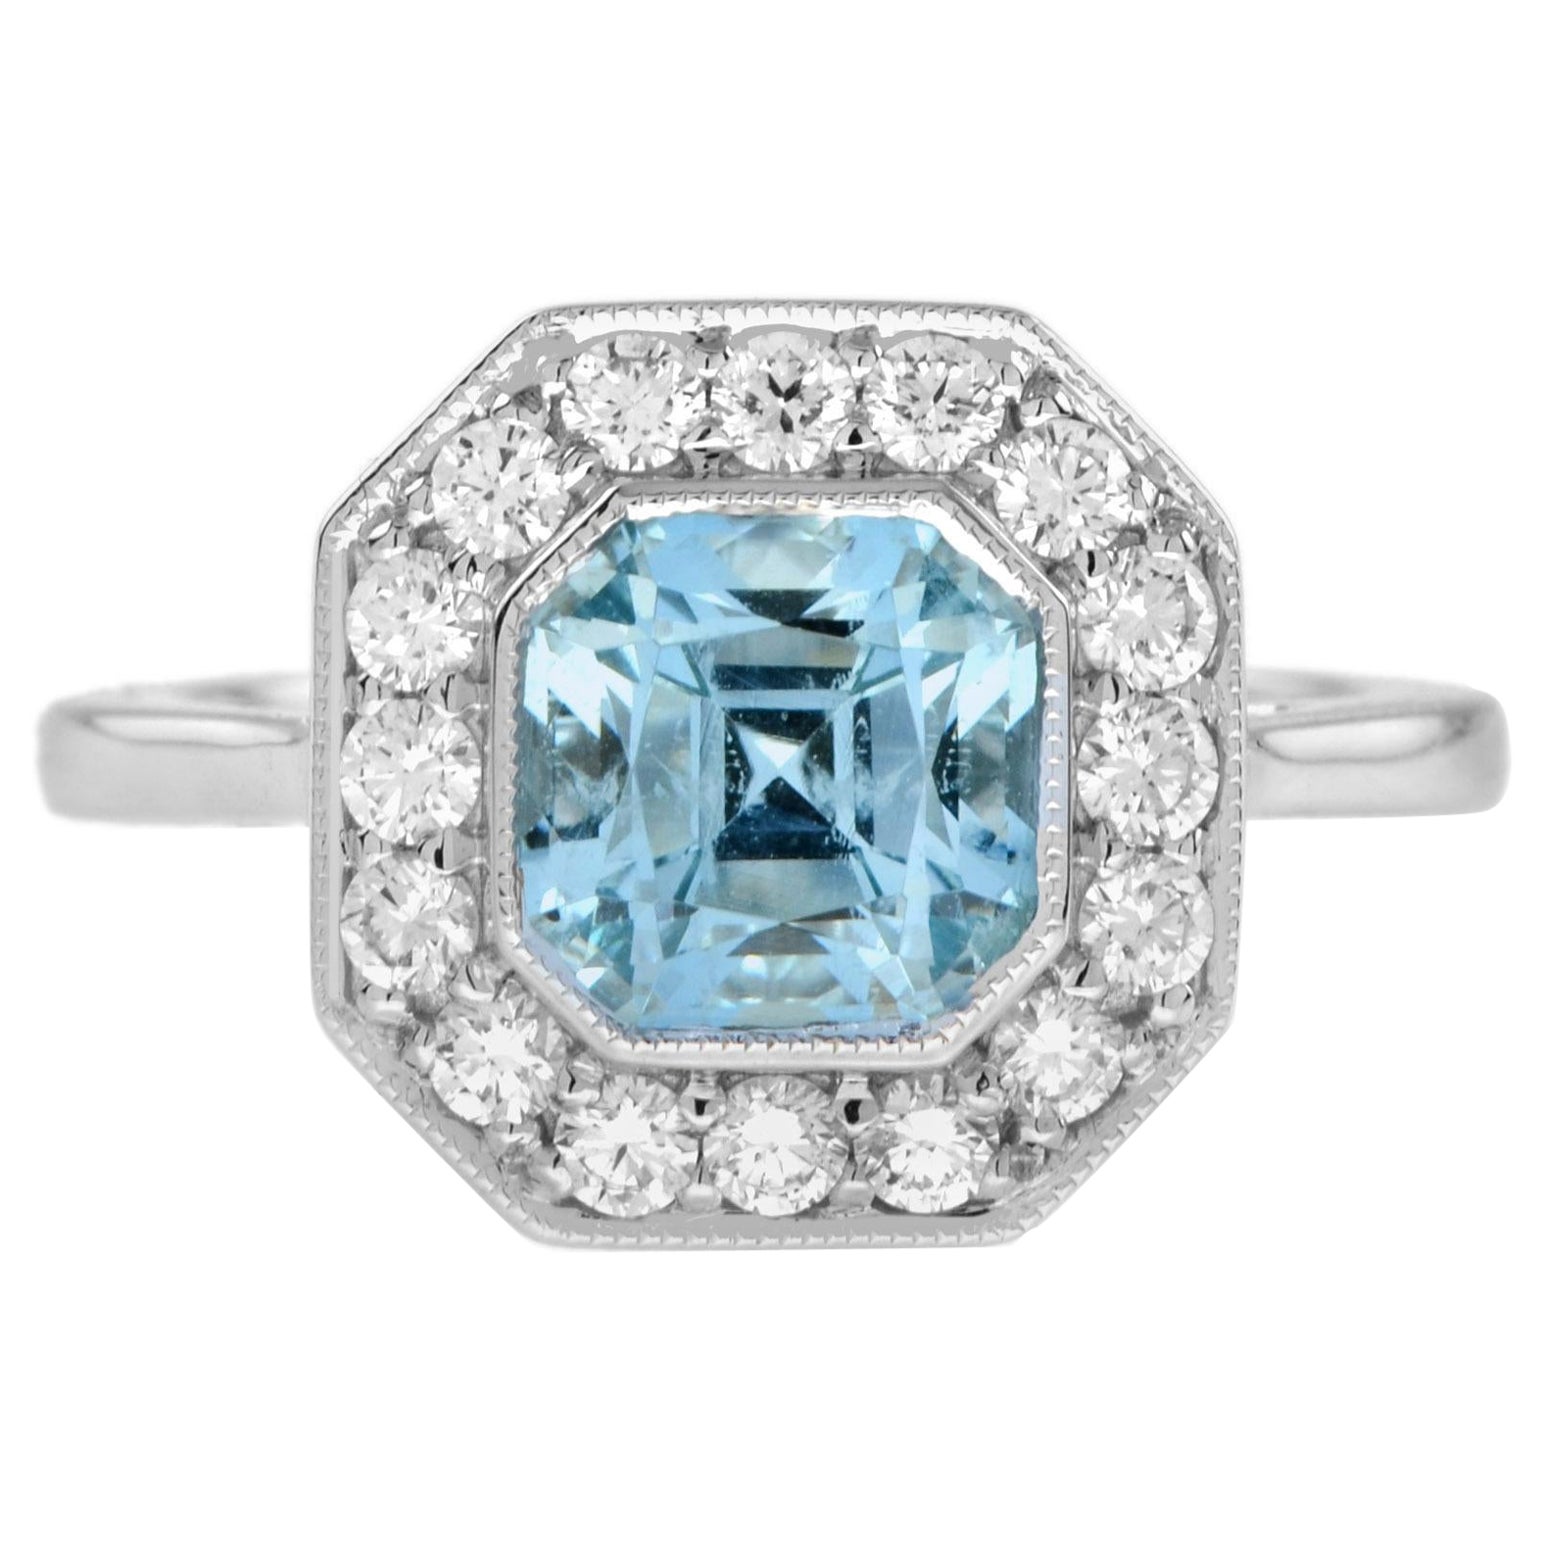 For Sale:  2.7 Ct. Blue Topaz and Diamond Art Deco Style Halo Engagement Ring in 14K Gold